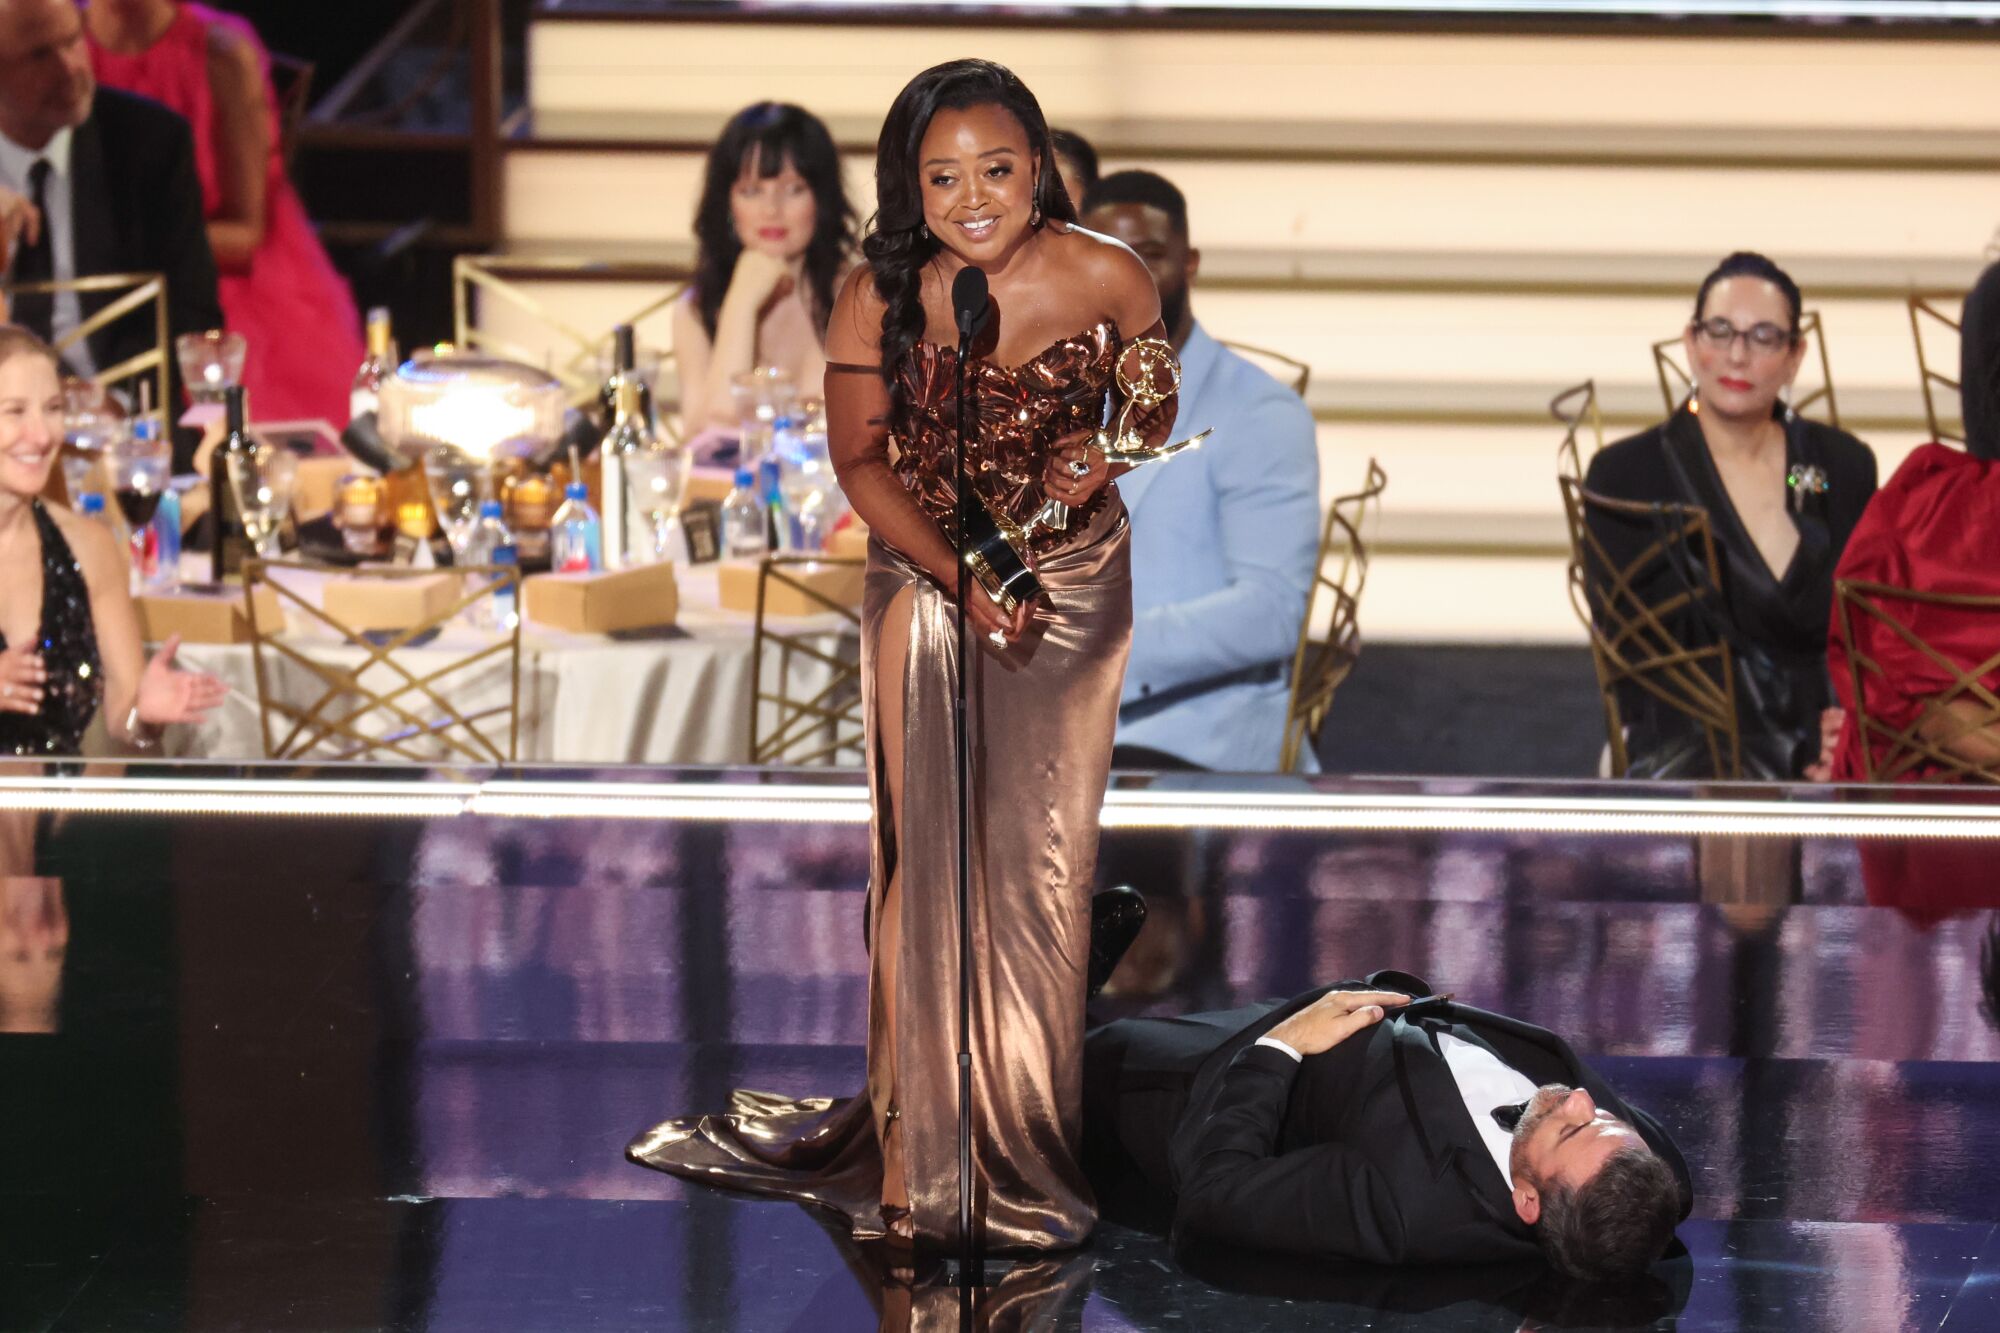 A smiling Quinta Brunson gives an Emmy acceptance speech while host Jimmy Kimmel plays dead on the stage.